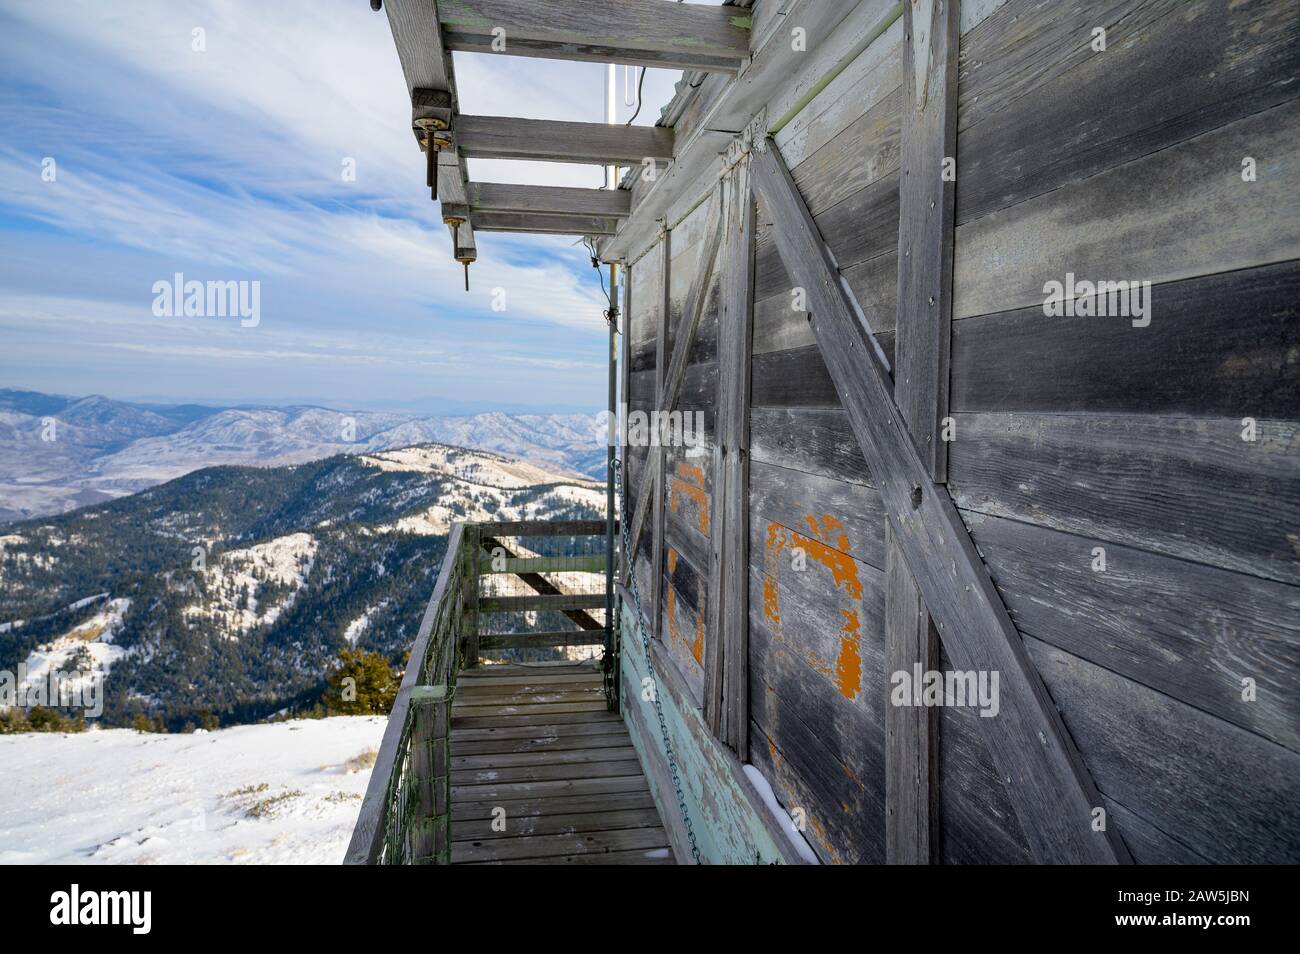 Fire Lookout Tower In The Mountains Stock Photo - Alamy